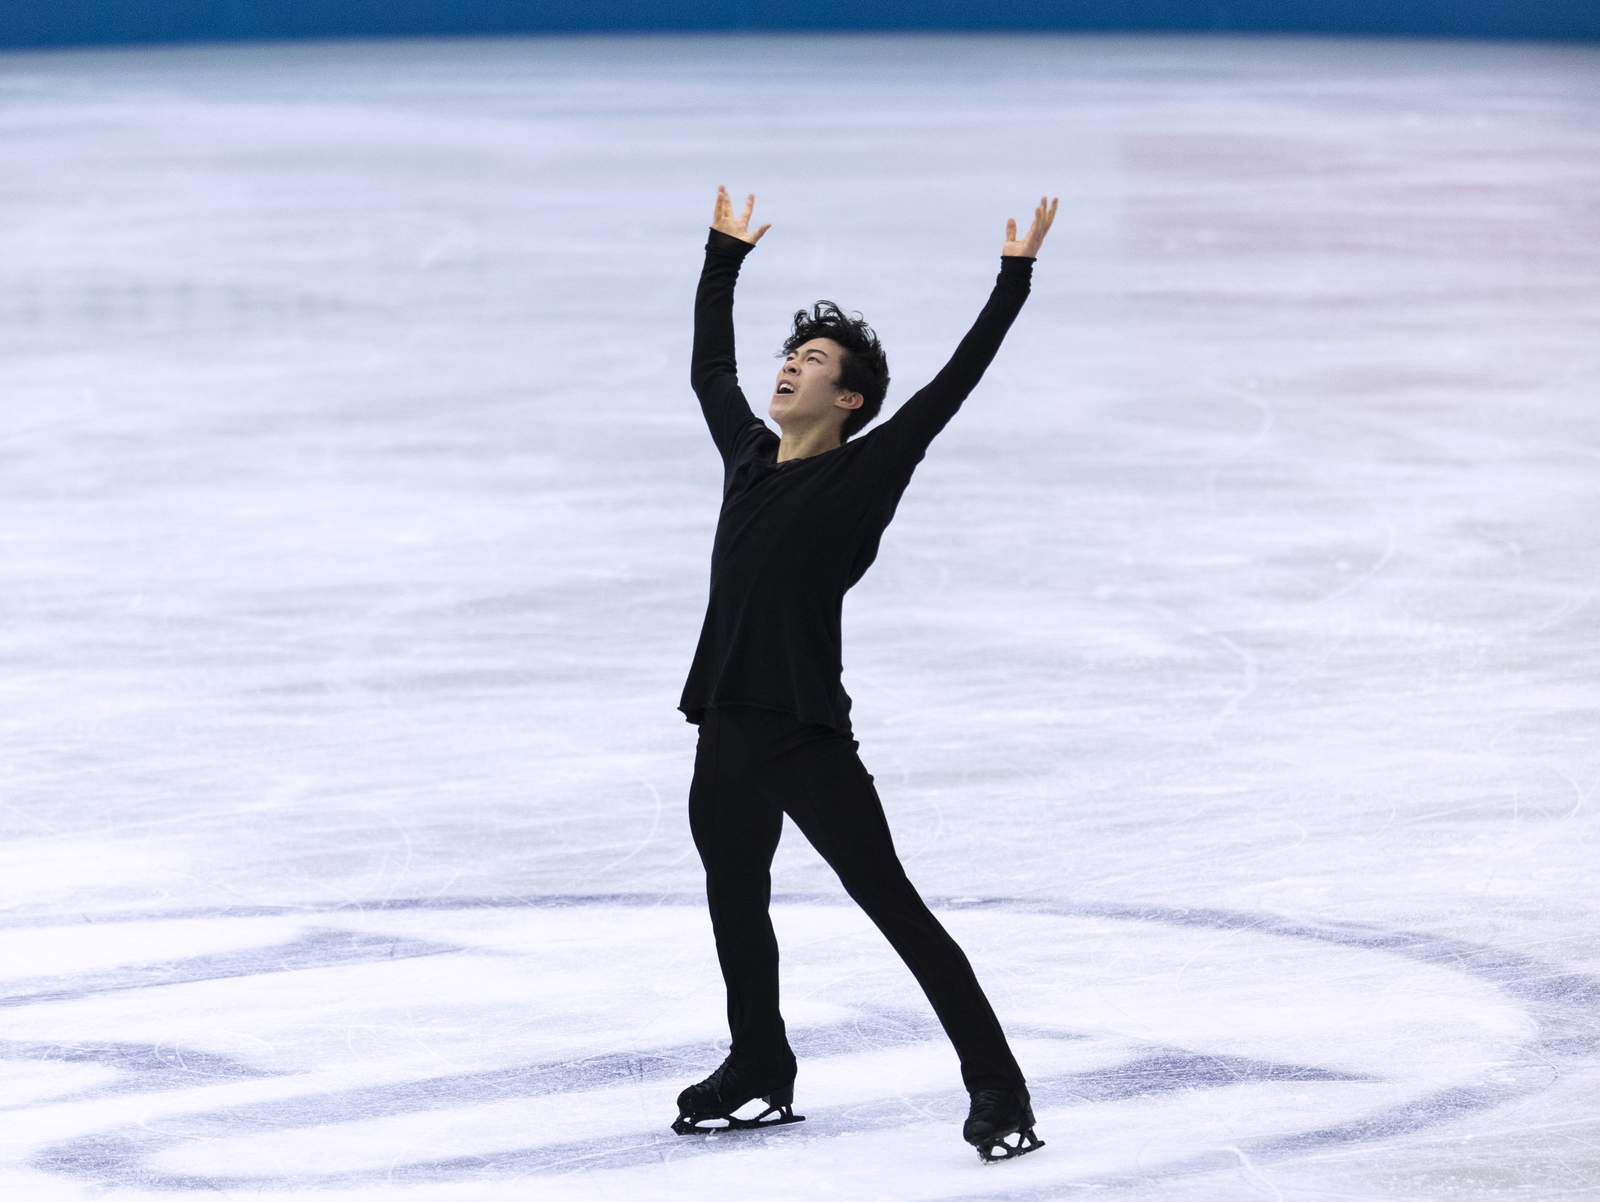 Chen tops Hanyu to win men's free skate at World Team Trophy